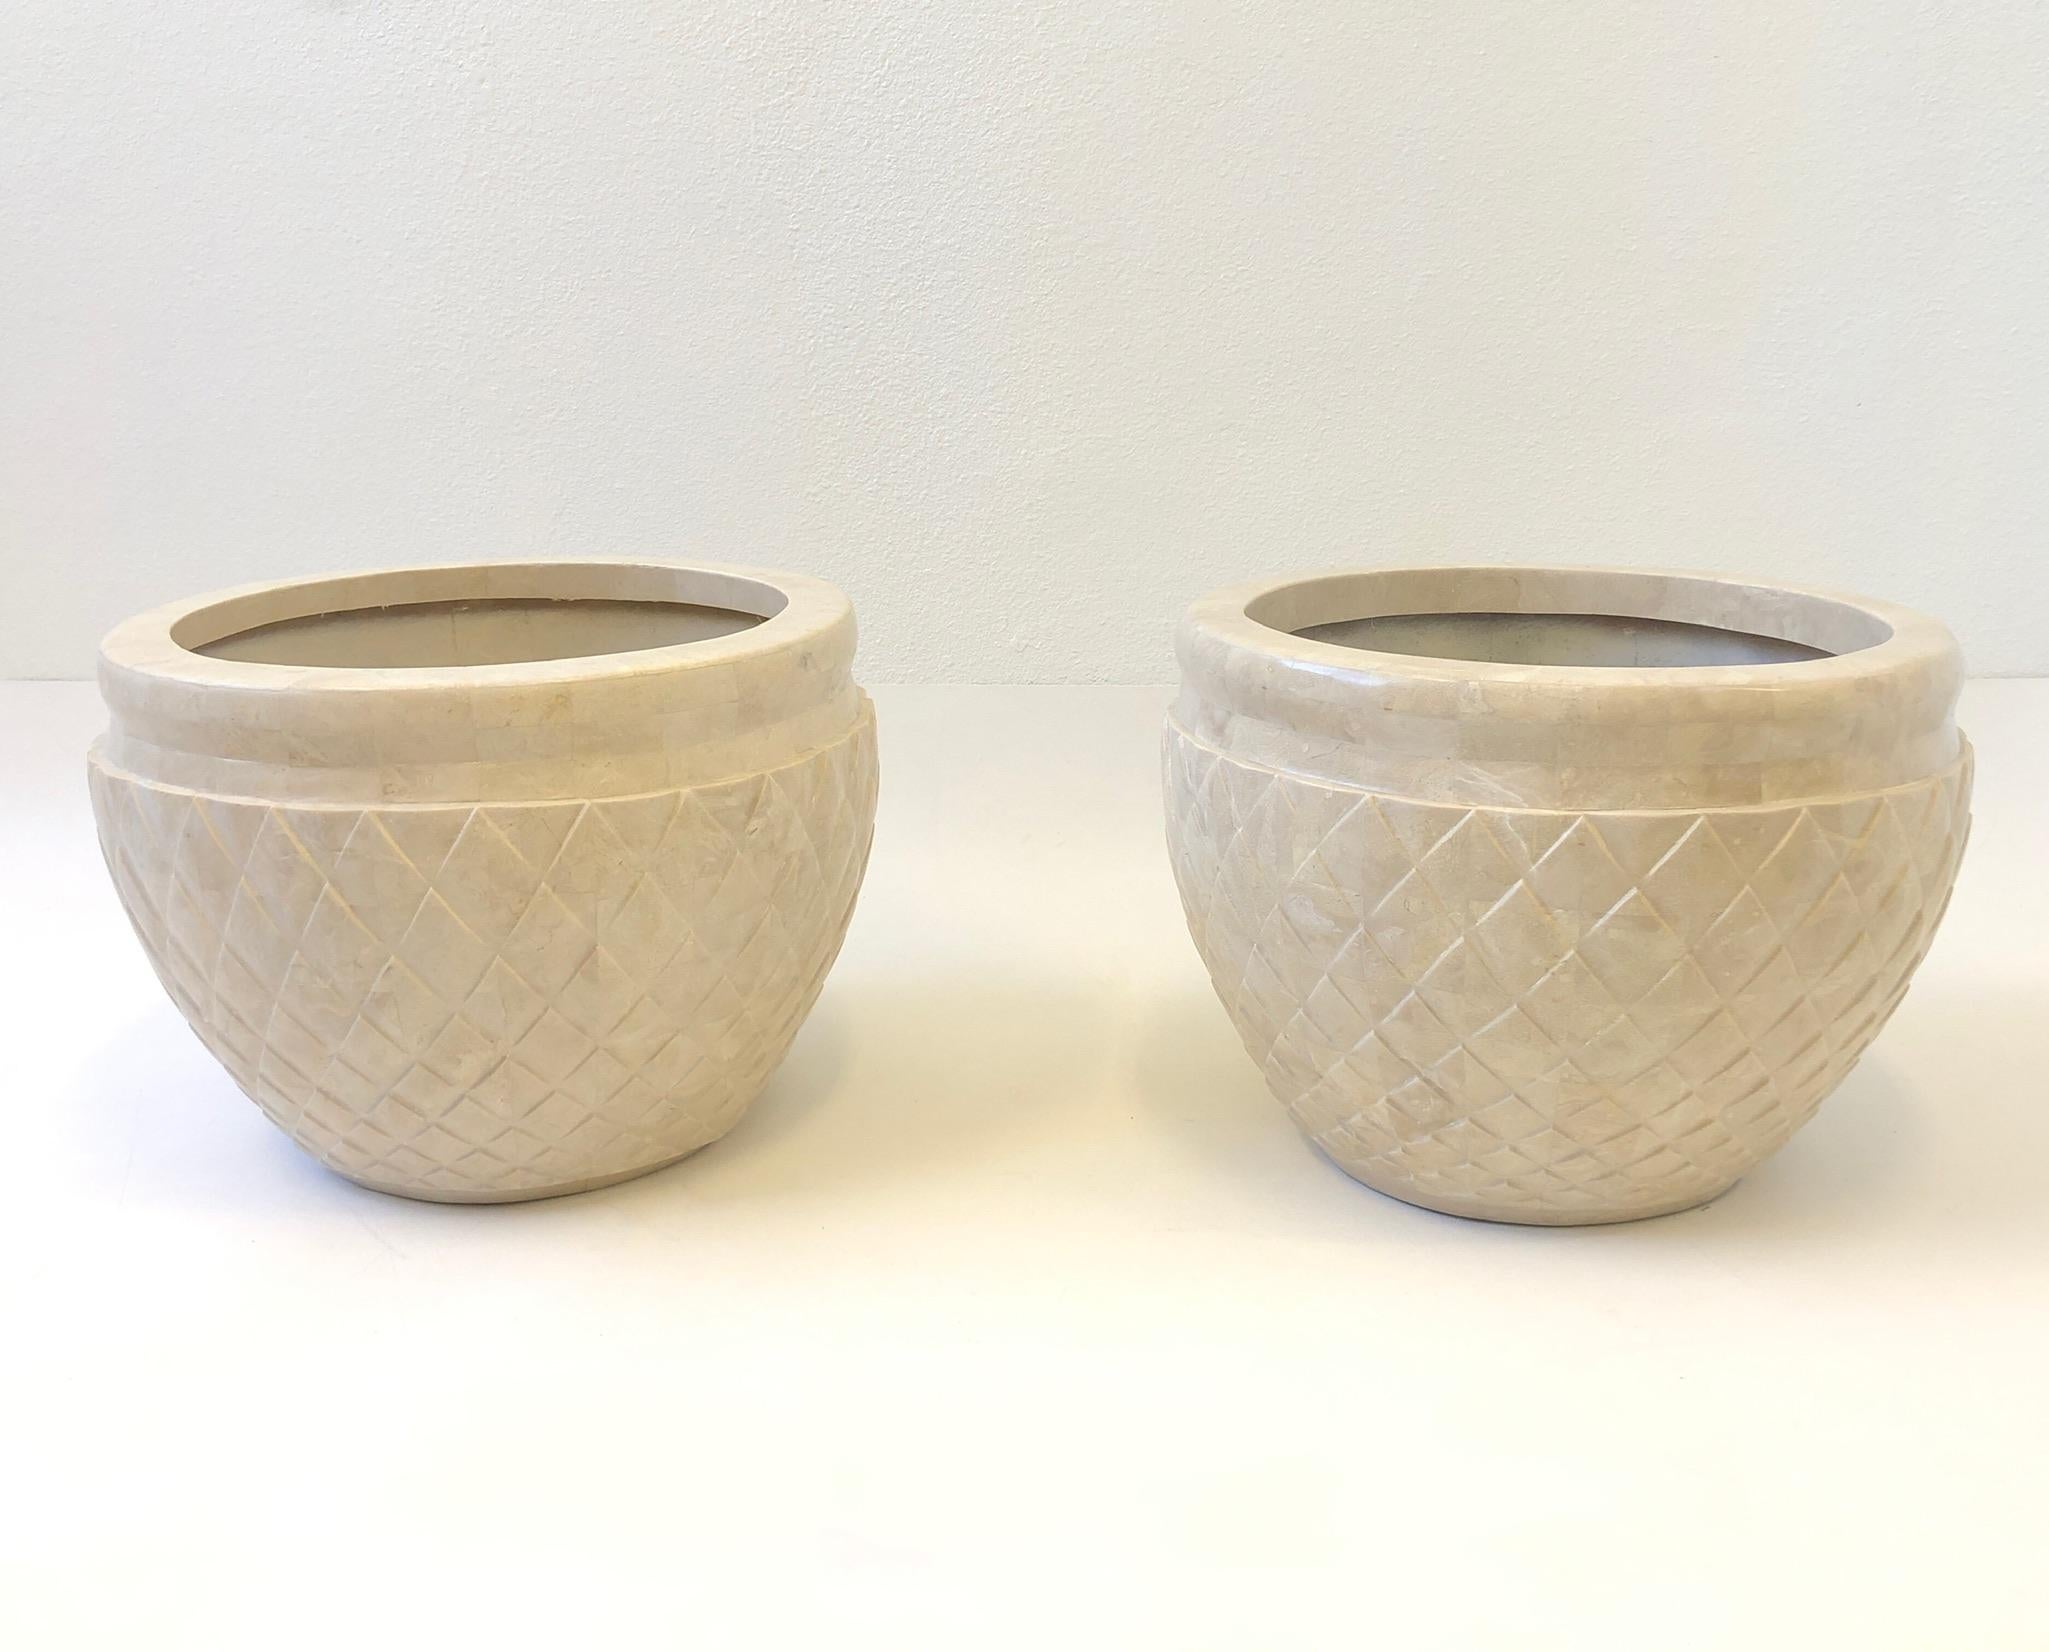 Glamorous pair of 1980s ‘Acorn’ planters designed by Marquis Collection of Beverly Hills.
Constructed of fiberglass covered with tessellated beige fossil stone.
Measurements: 21” Diameter and 16” High.